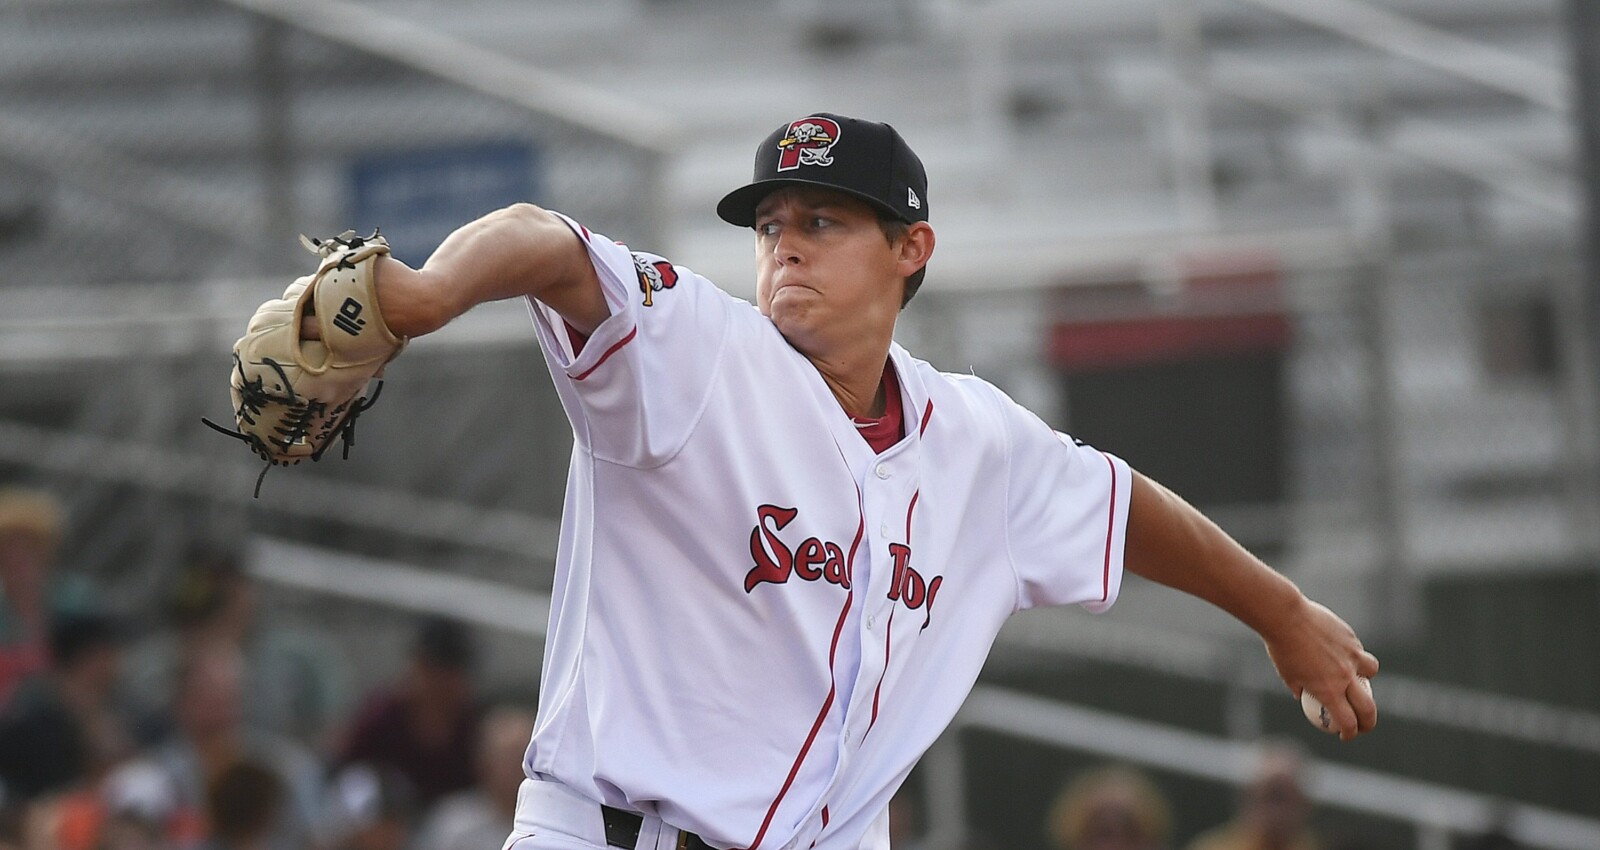 Portland Sea Dogs - We conclude our series of potential Sea Dogs players  with a profile of Red Sox top-ranked prospect Triston Casas. Thank you to  our friends at Prospects1500 for providing